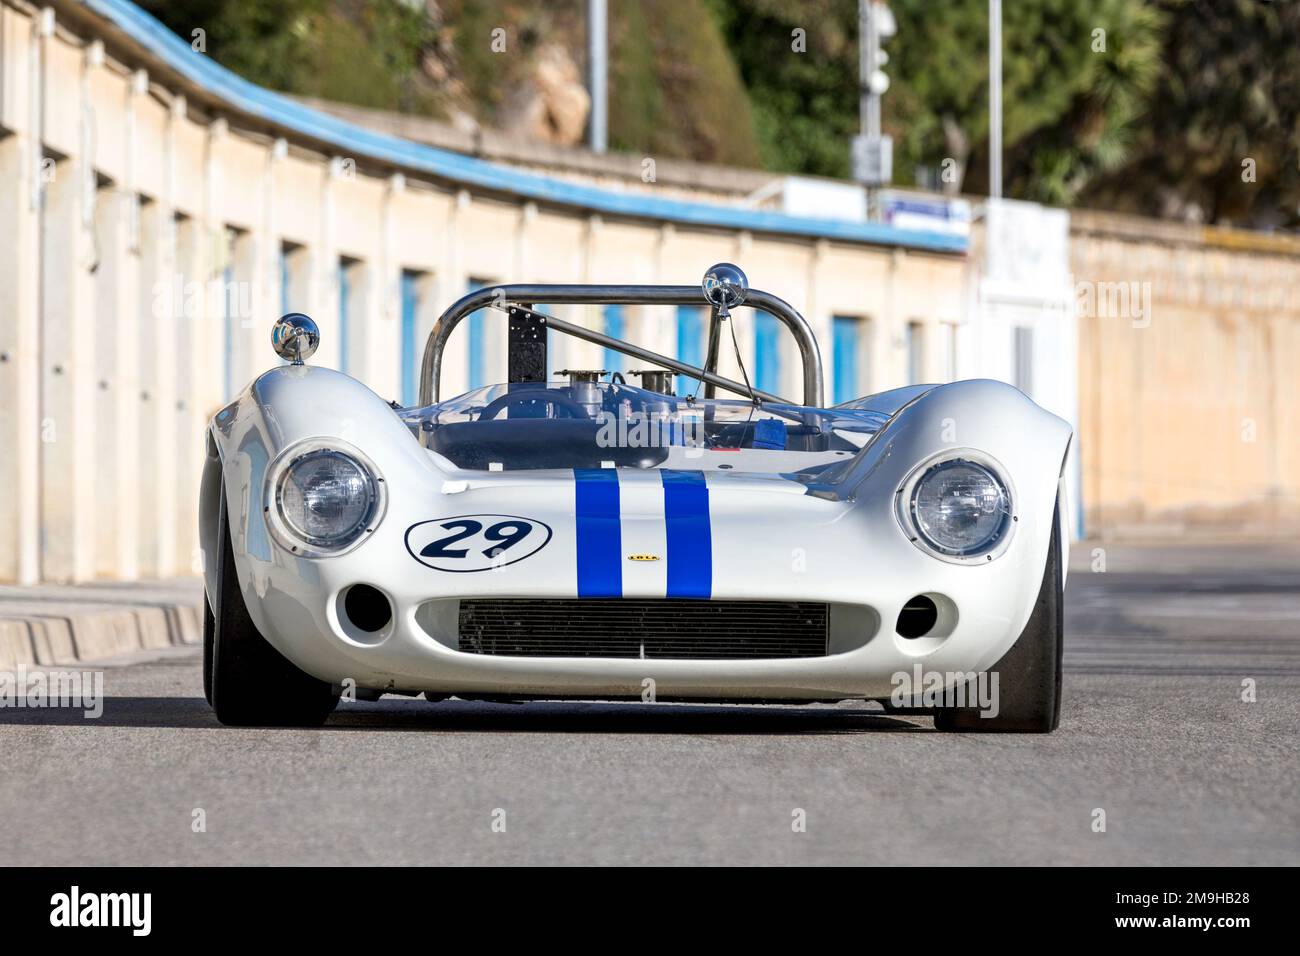 Front view of Lola T70 MkII Spyder sports car parked on road Stock Photo